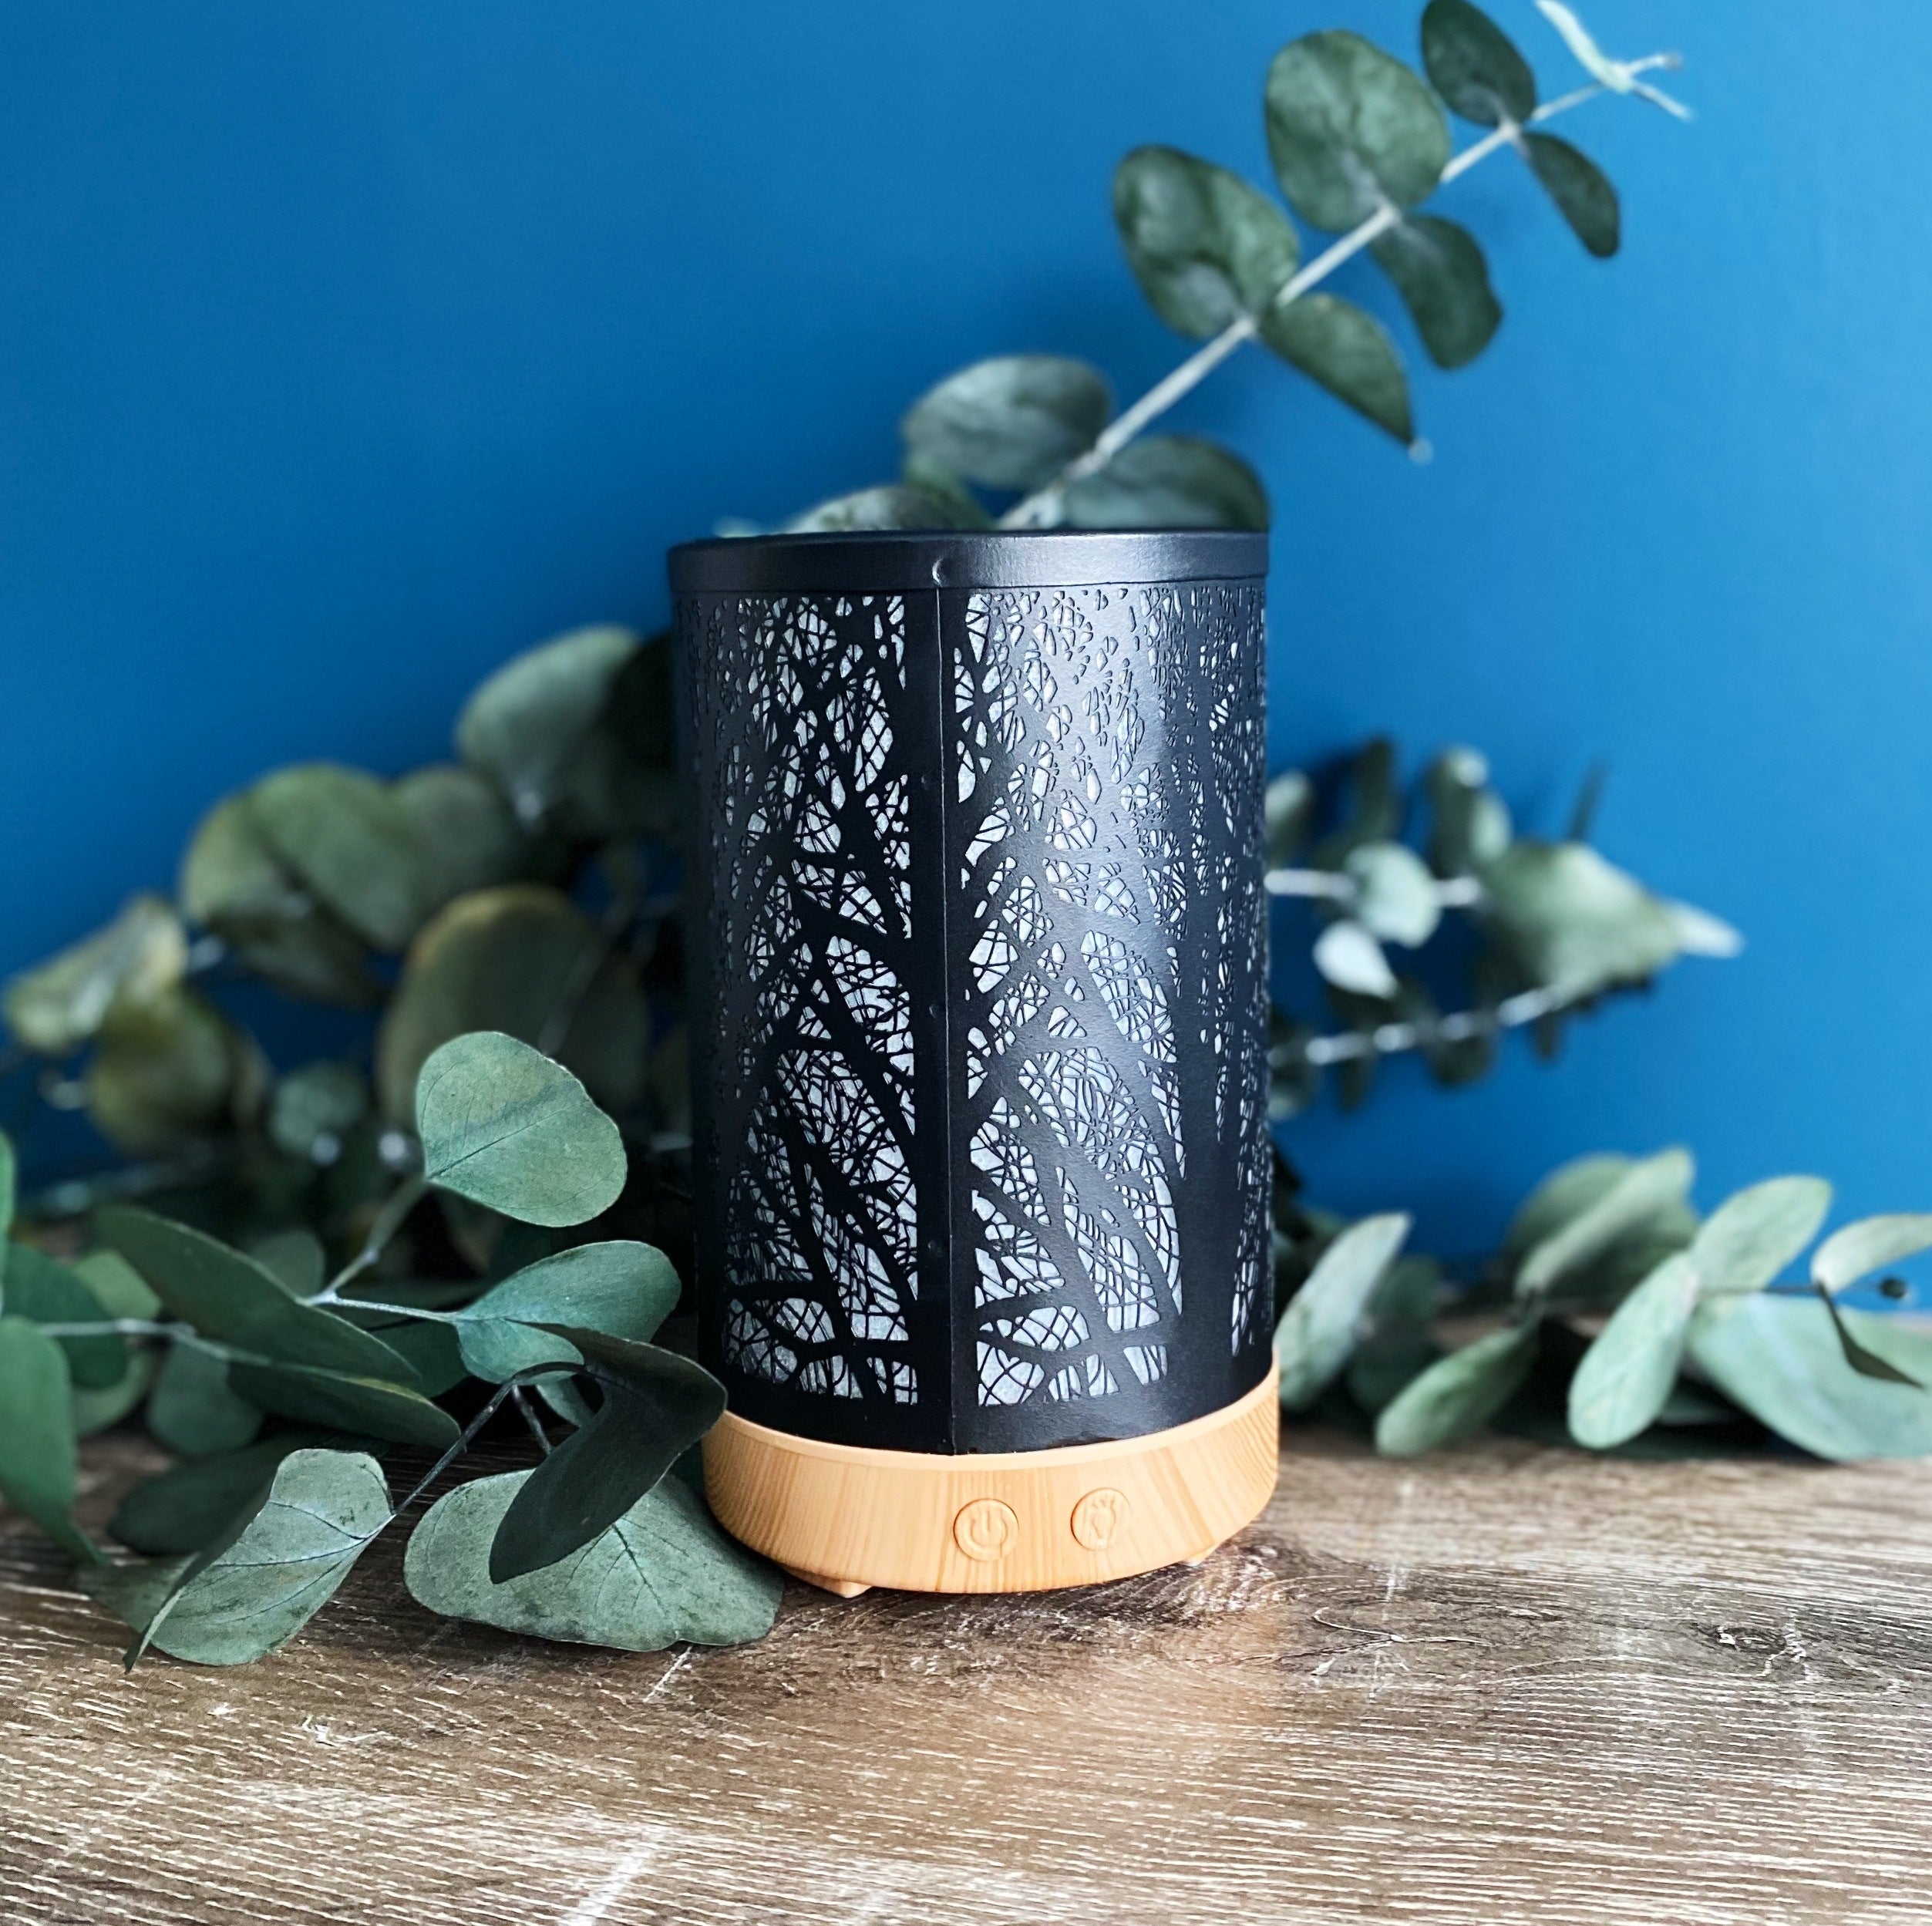 The Woodland Ultrasonic Essential Oil Diffuser